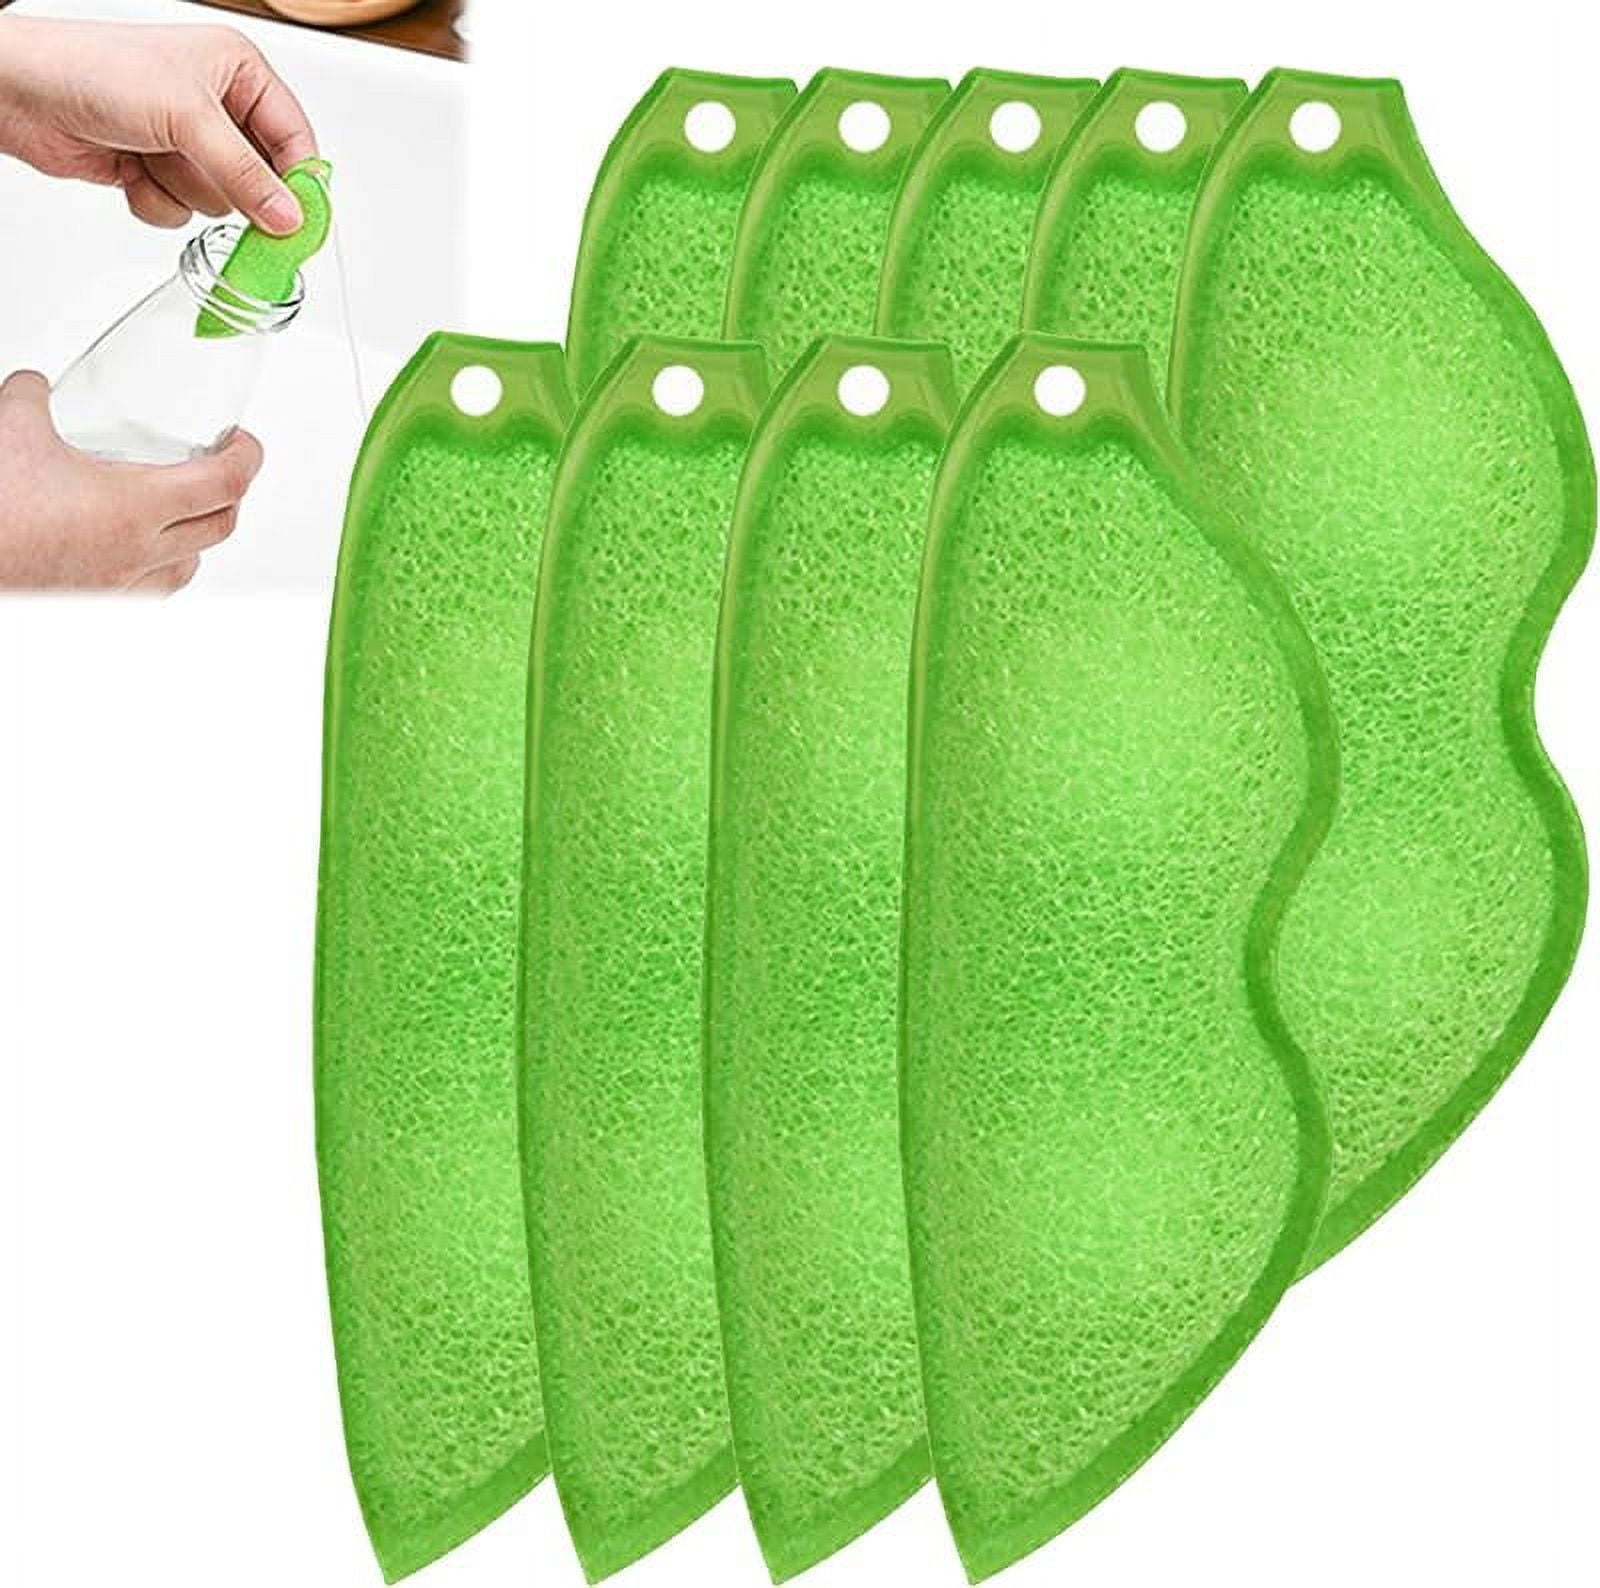  Fhavent Bottle Cleaning Sponge, Beans-Shaped Bottle Cleaning  Sponge, Reuseable Bottle Cleaning Sponge, Heat Resistance Bottle Sponge for  Internal Cleaning of Small Mouth B (Green) : Health & Household